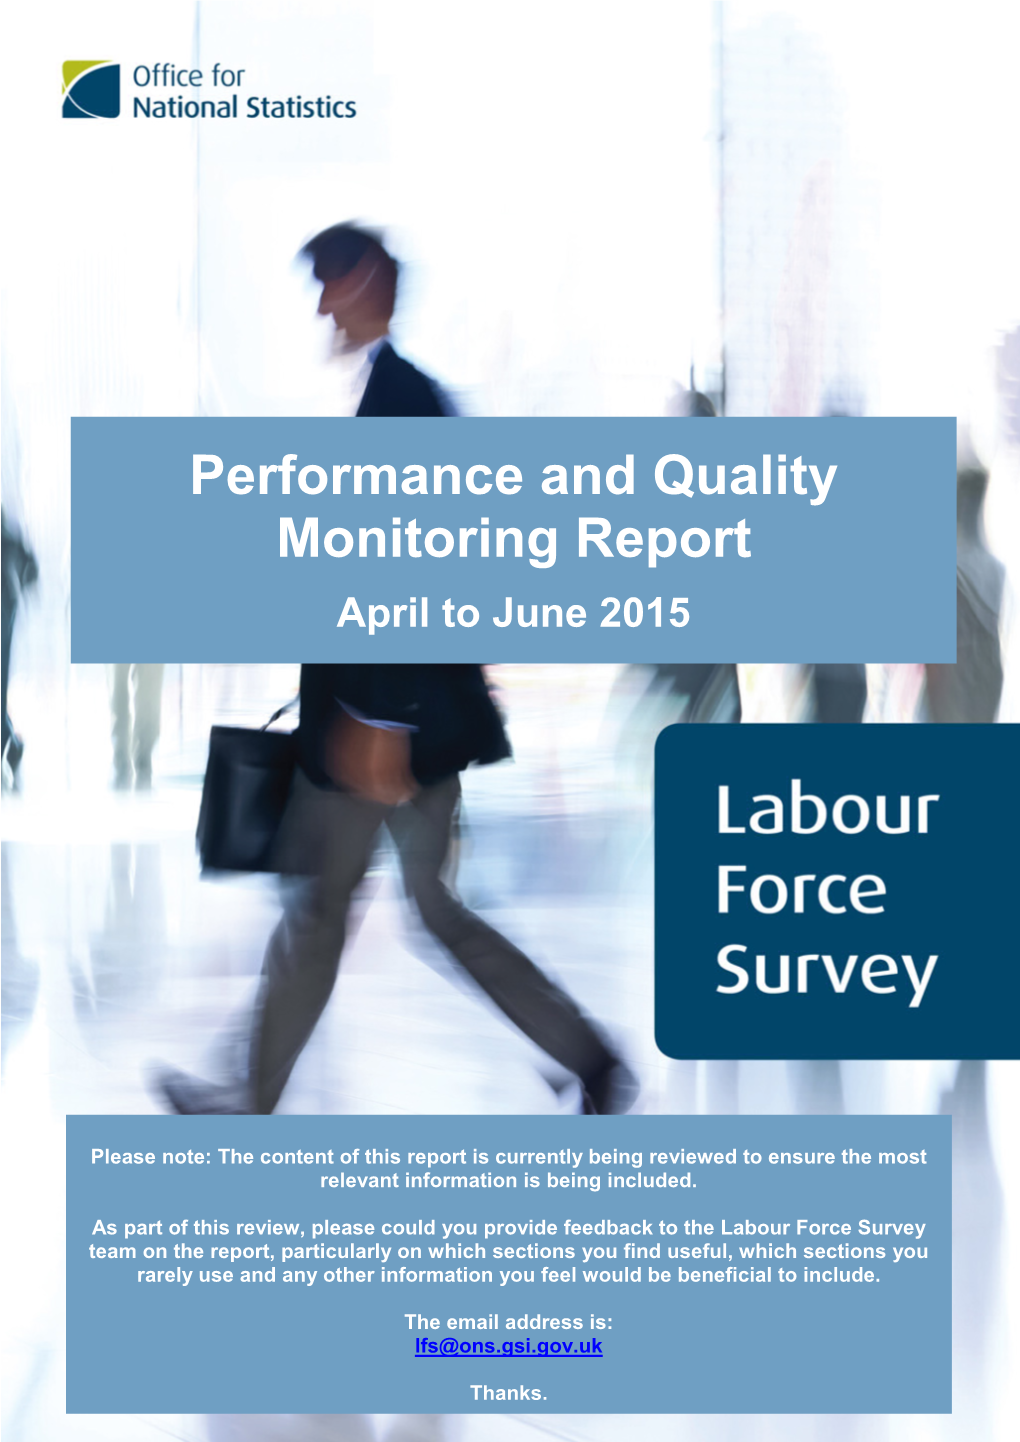 Performance and Quality Monitoring Report